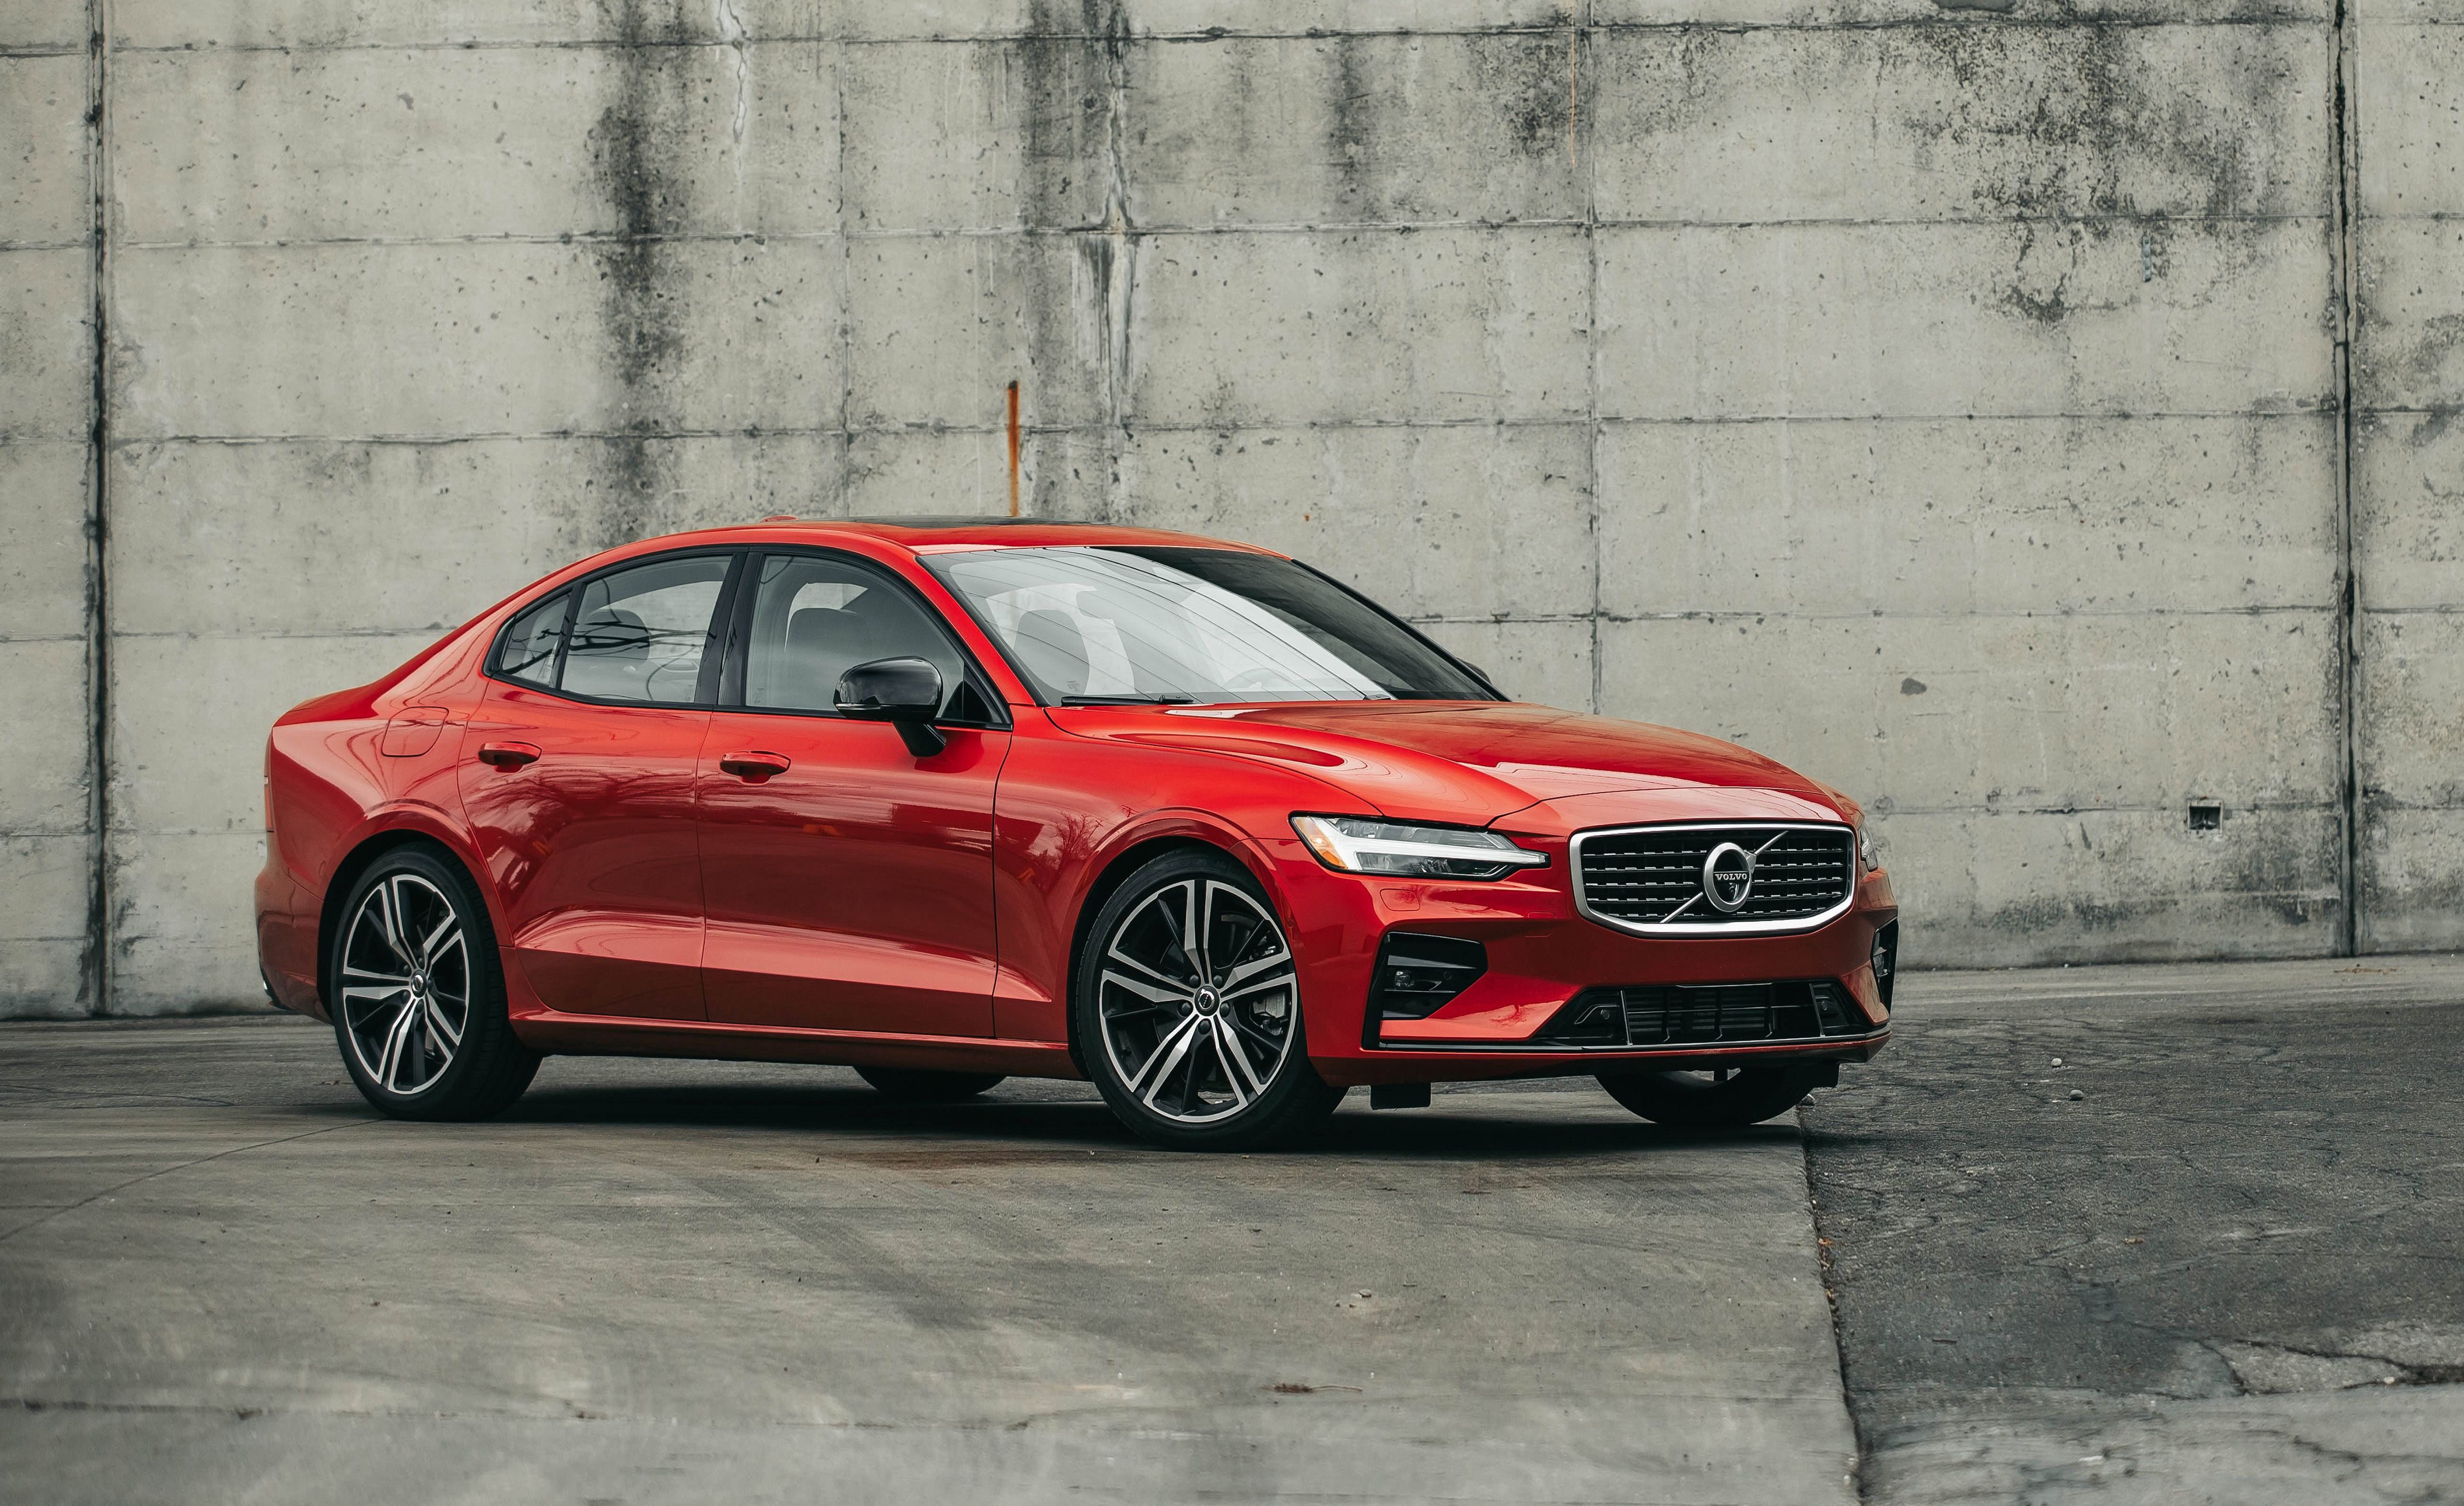 2019 Volvo S60 Reviews Volvo S60 Price Photos And Specs Car And Free